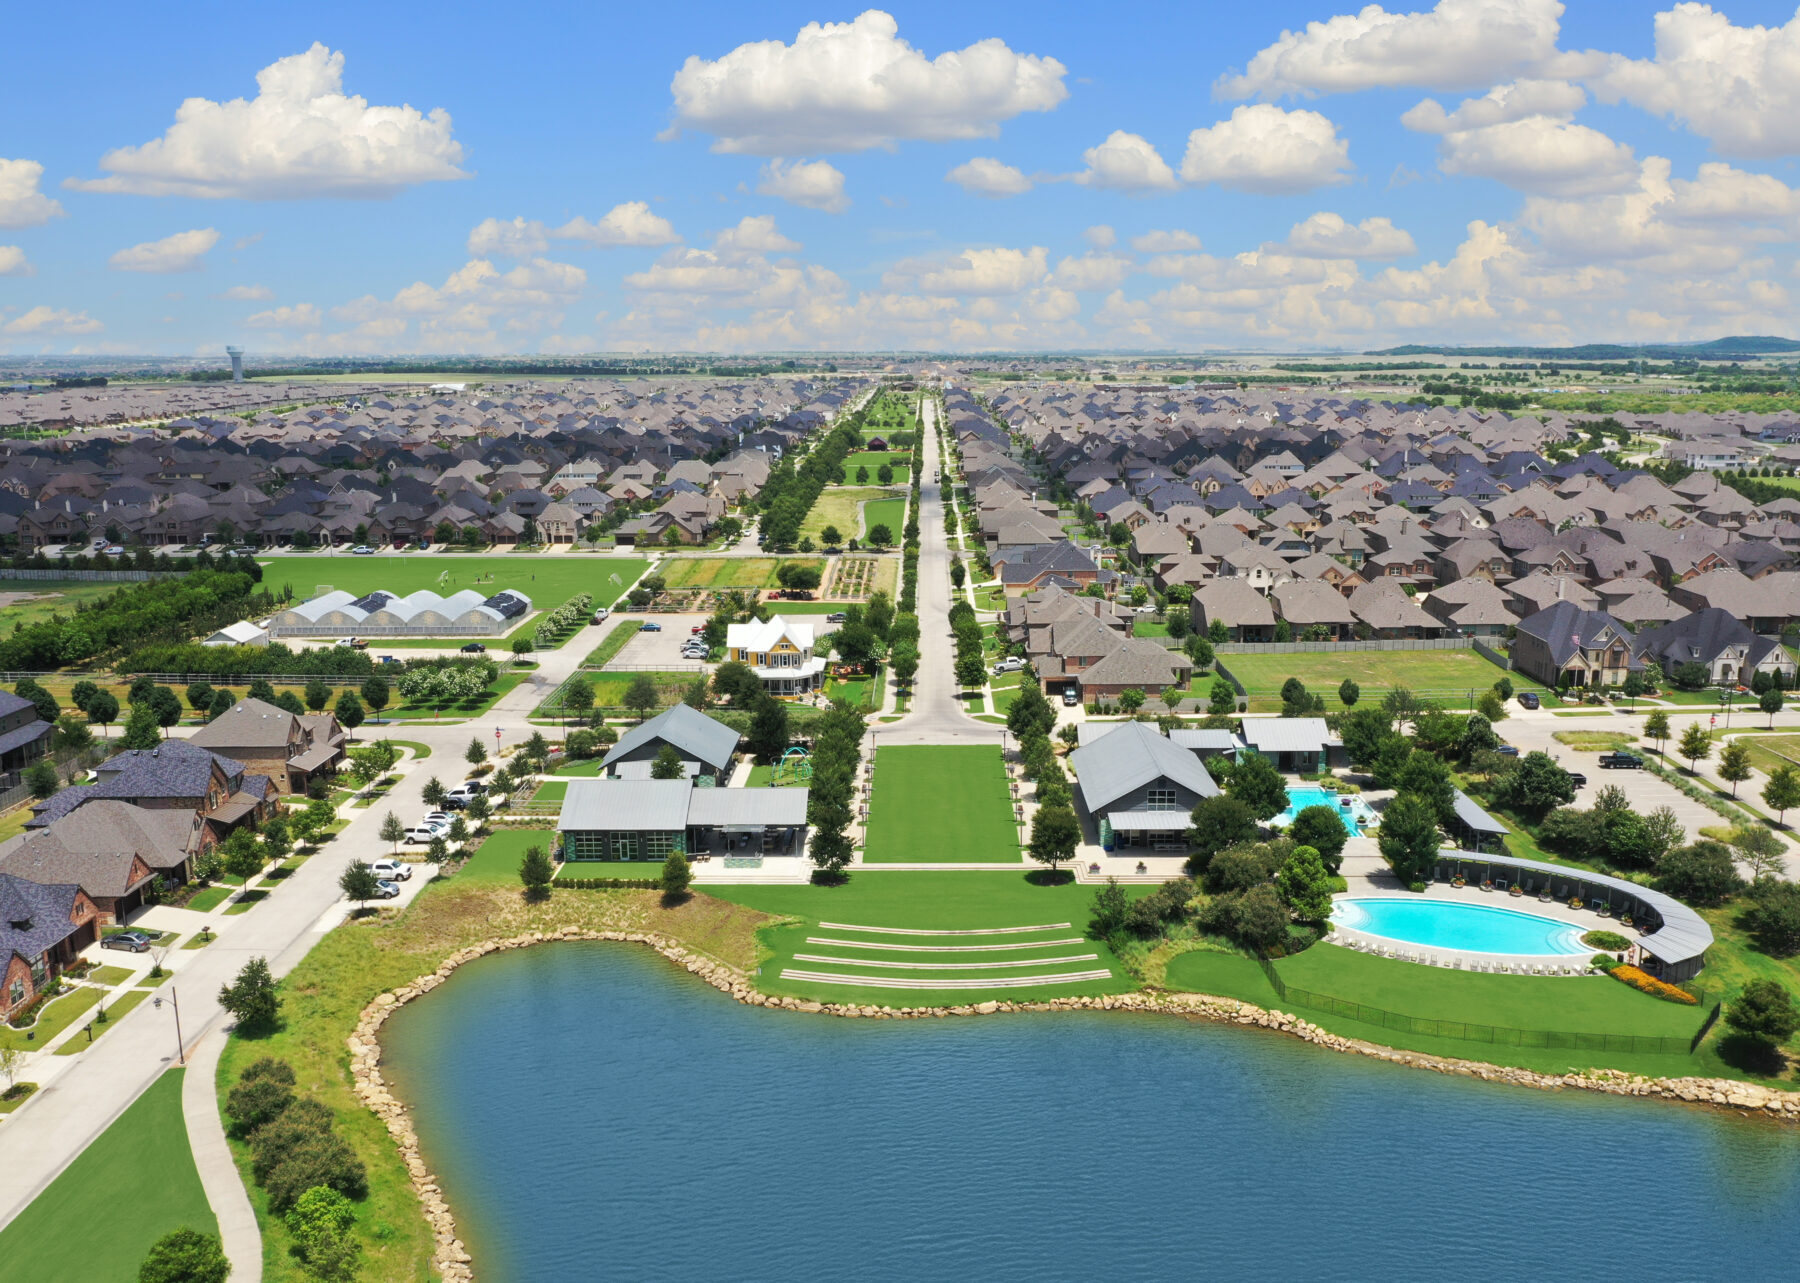 A bird's eye view of the homes, parks and amenities at a Lifestyle by Hillwood community